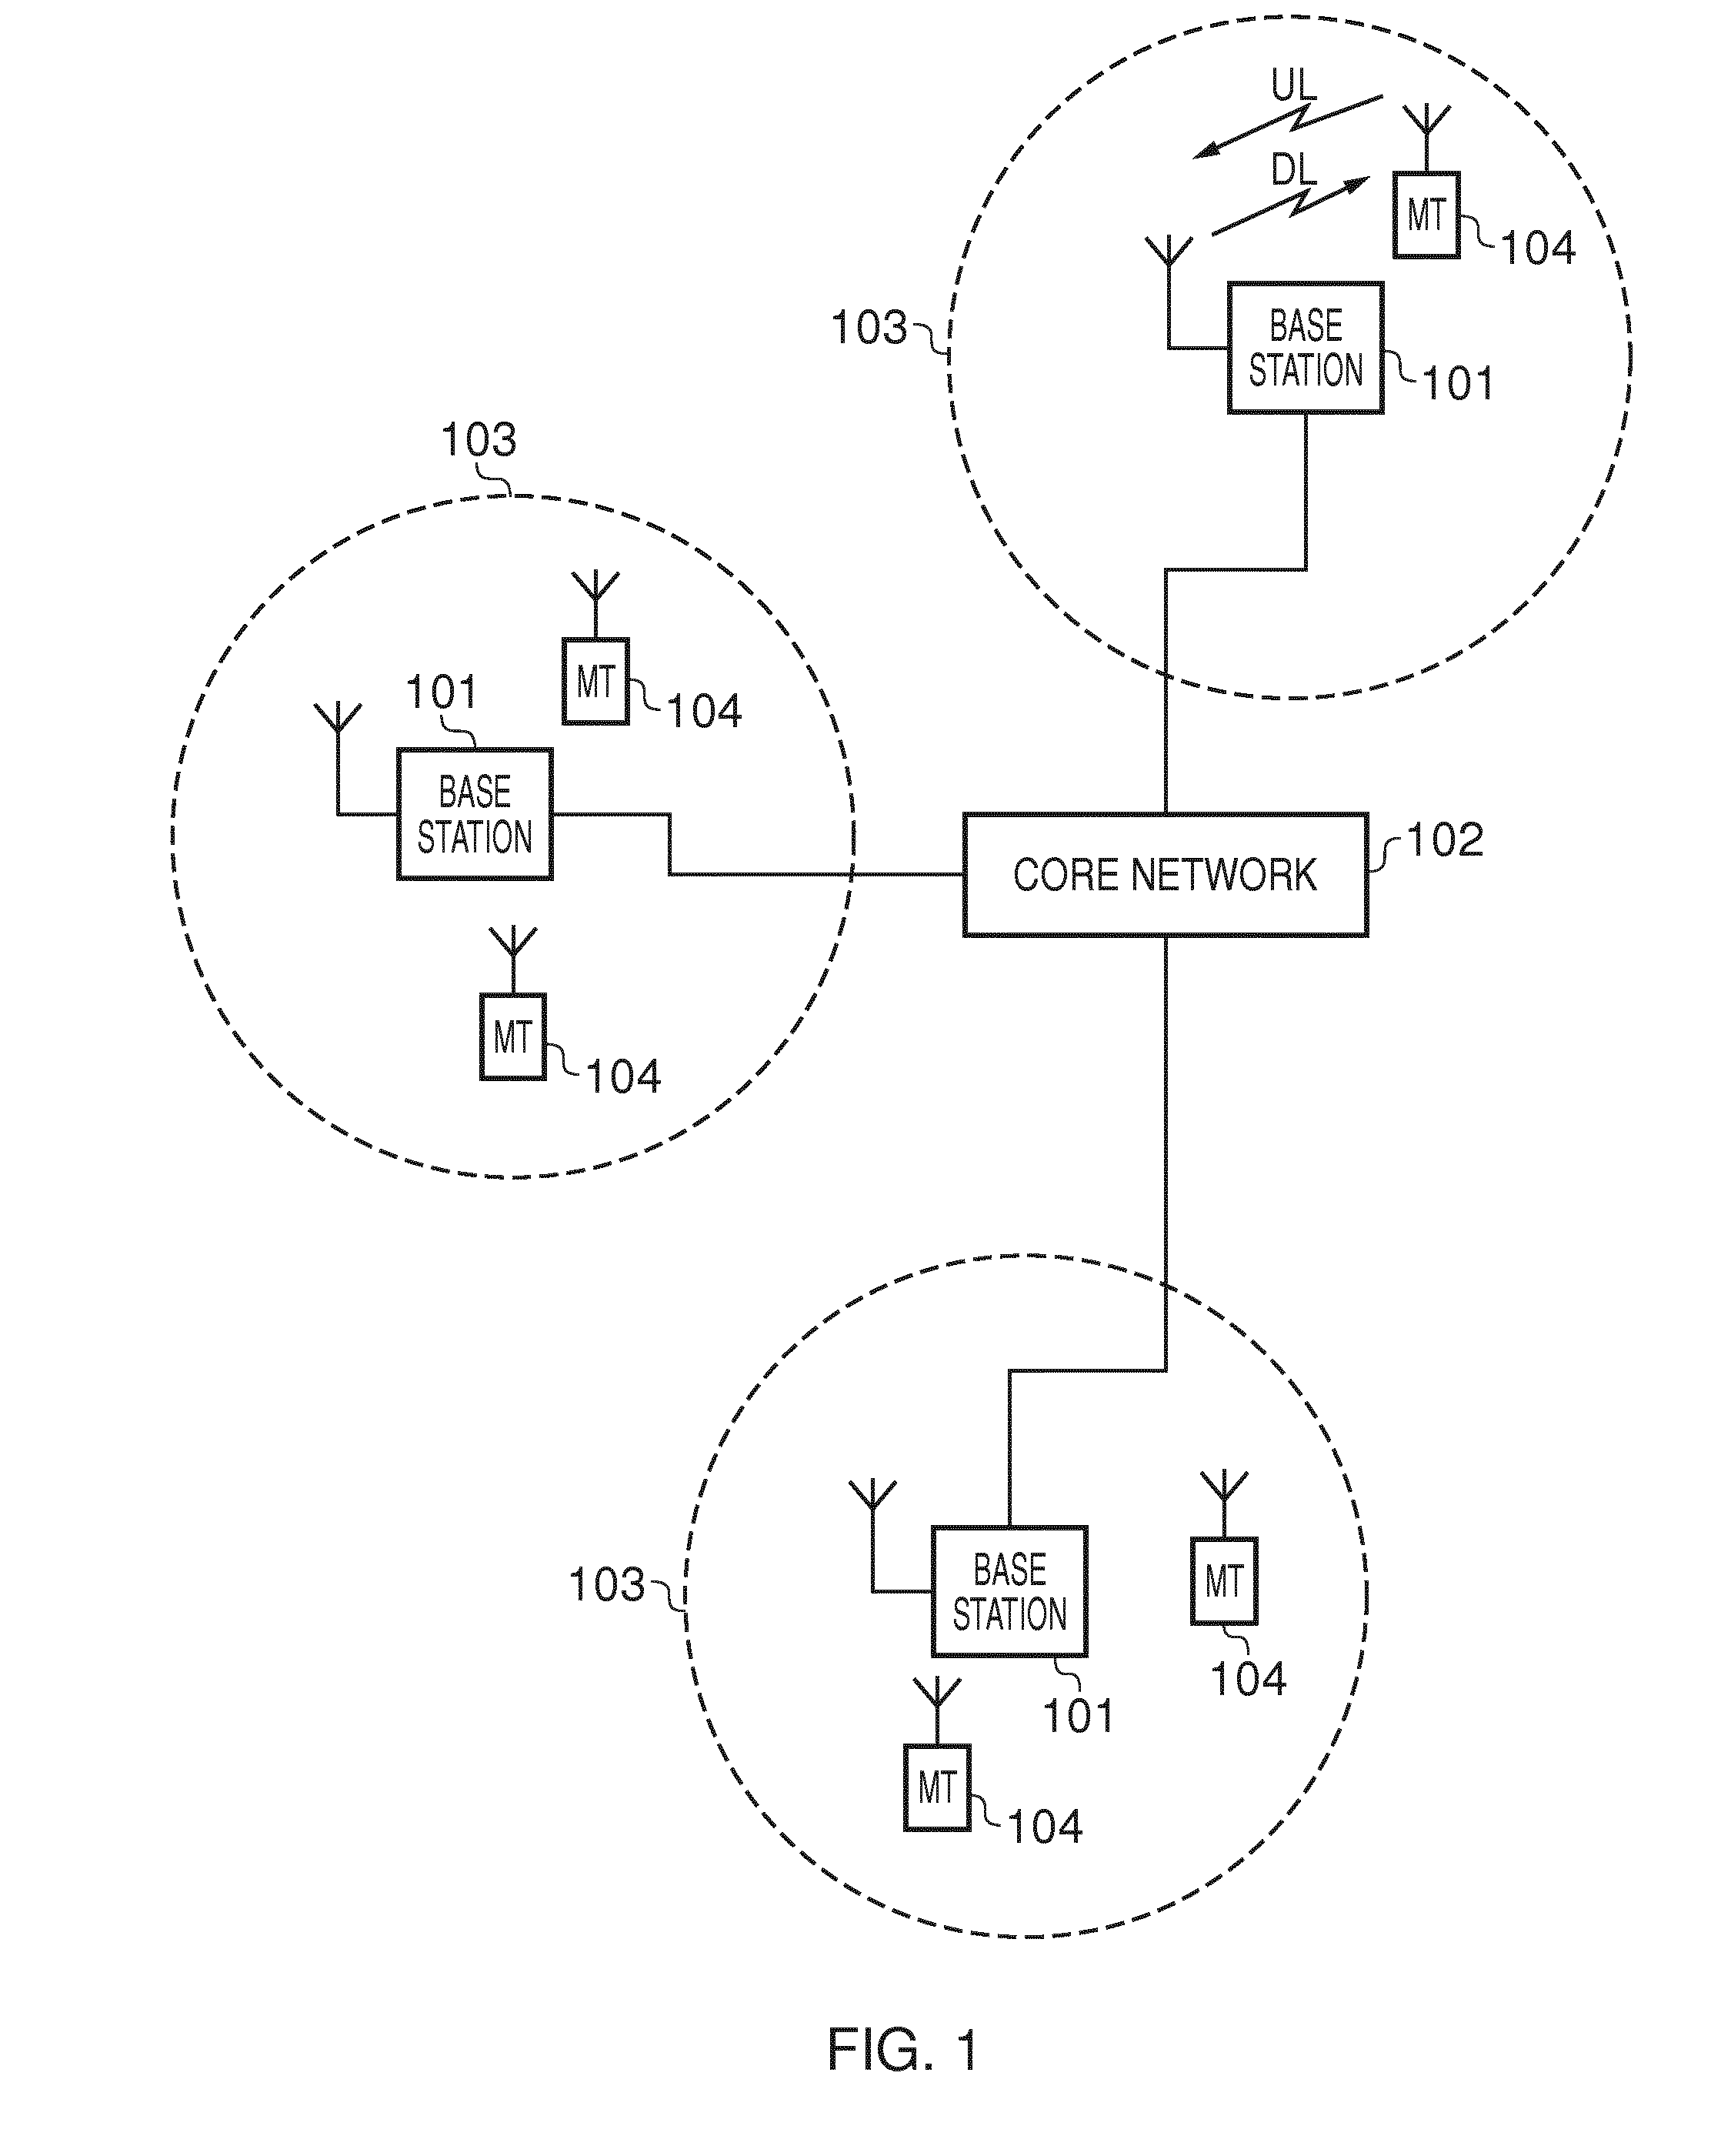 Transmission of measurement reports in a wireless communication system